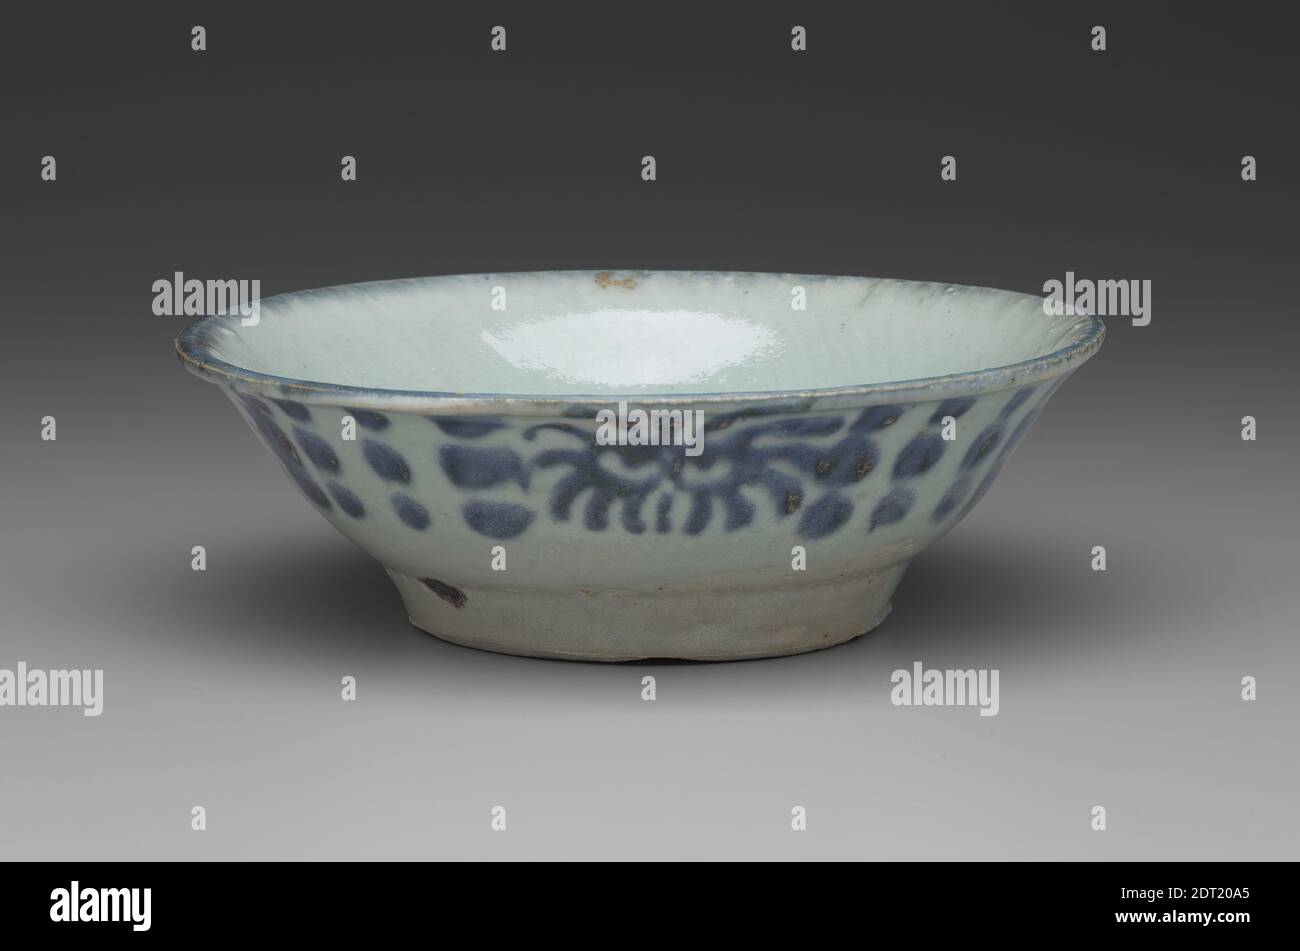 Bowl, early 7th–9th century, Underglaze Blue and inscription, 2 1/4 × 6 13/16 in. (5.7 × 17.3 cm), China, Chinese, Tang dynasty (618–907 C.E.), Containers - Ceramics Stock Photo